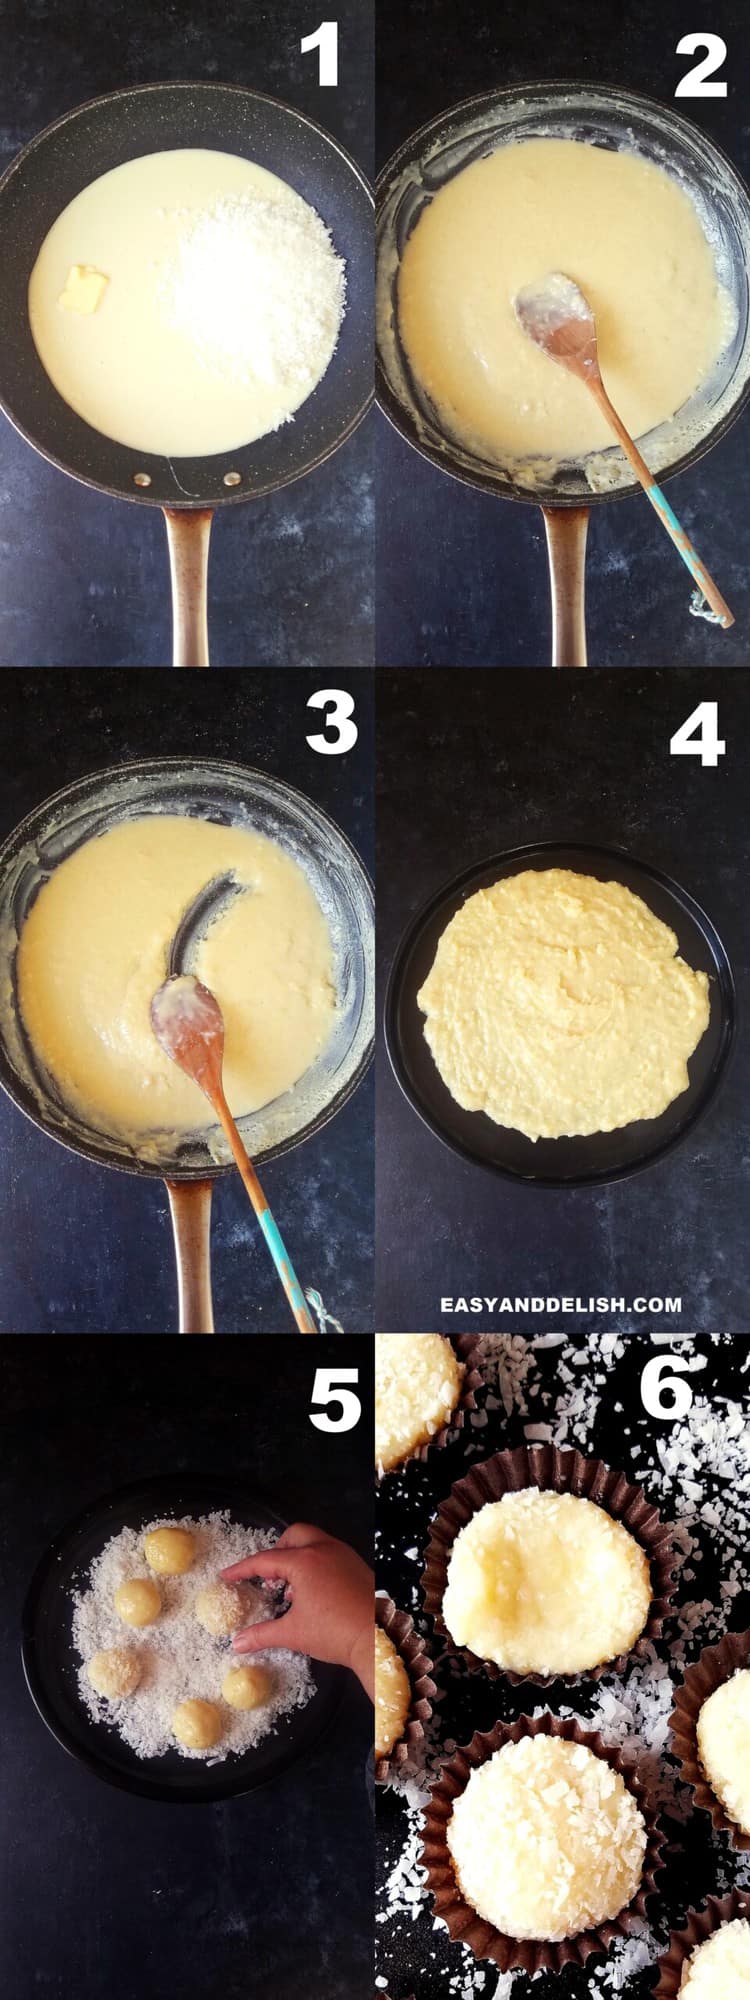 image collage showing how to make coconut kisses in 6 steps